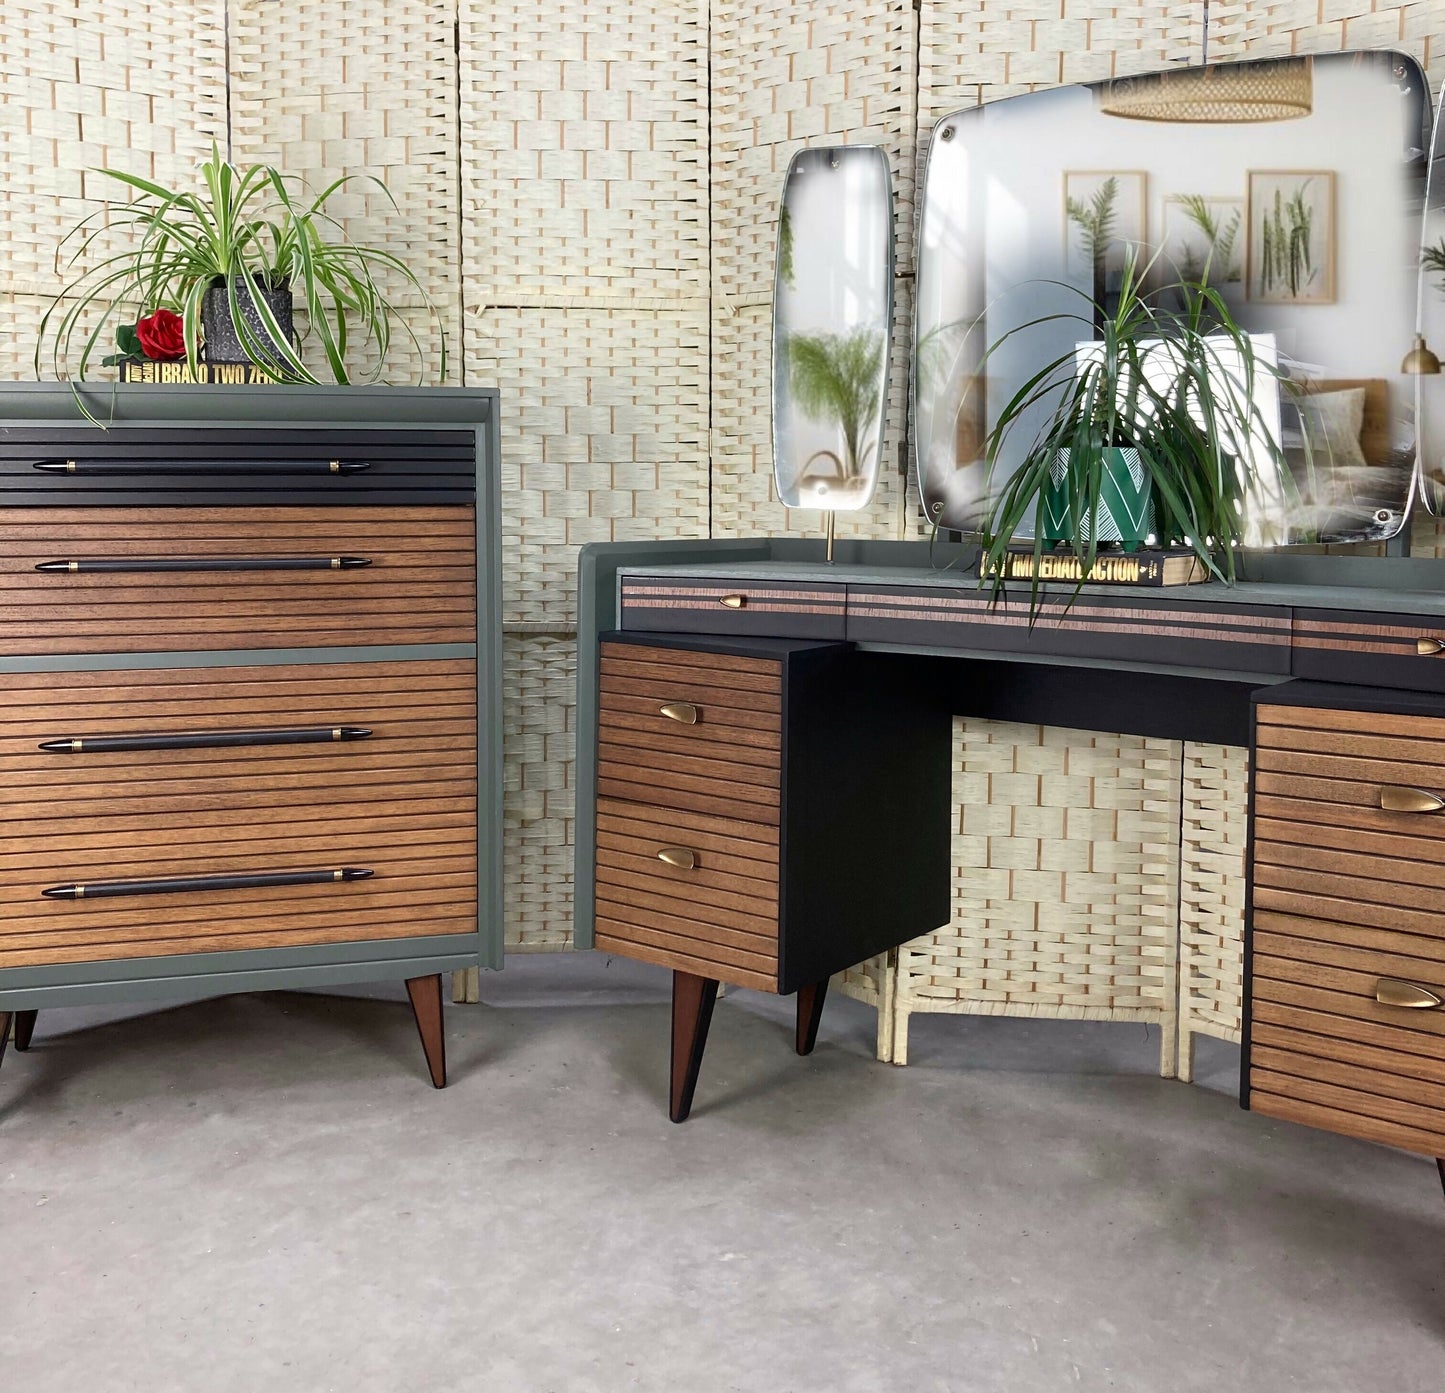 Retro Mid Century Modern 3 piece Lebus Link bedroom set in Green, Black and Wood.